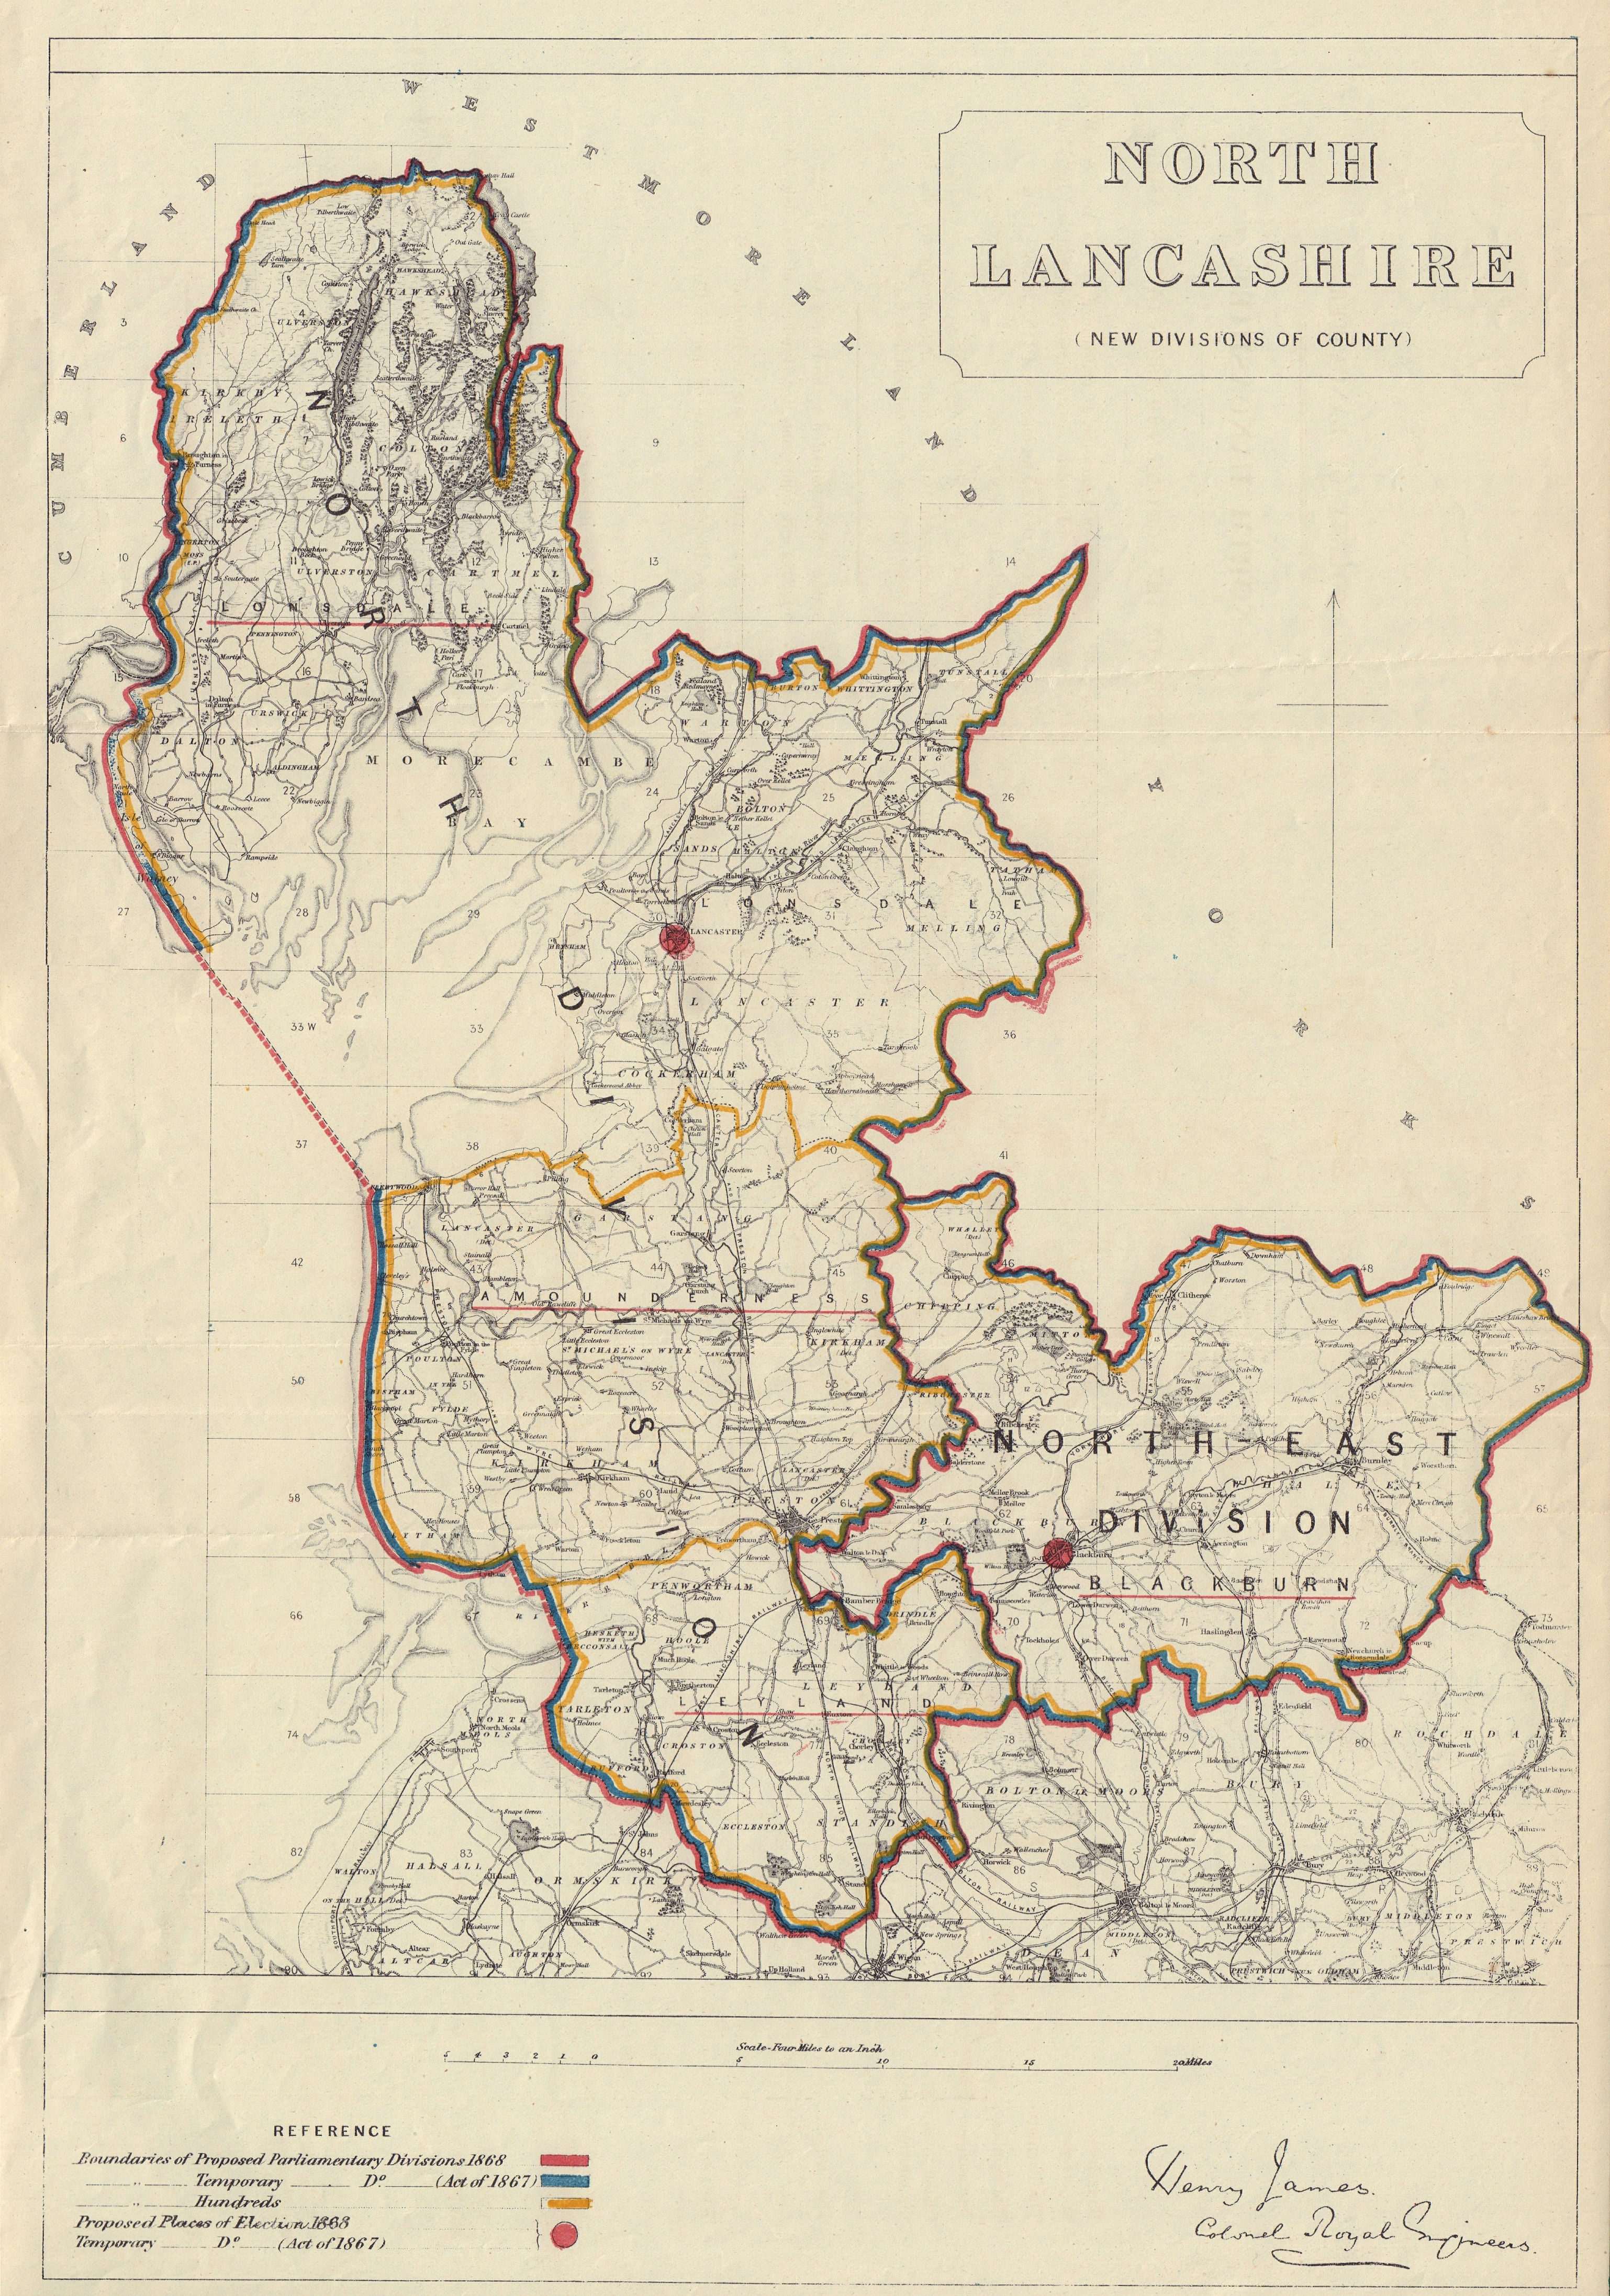 North Lancashire new divisions JAMES. PARLIAMENTARY BOUNDARY COMMISSION 1868 map